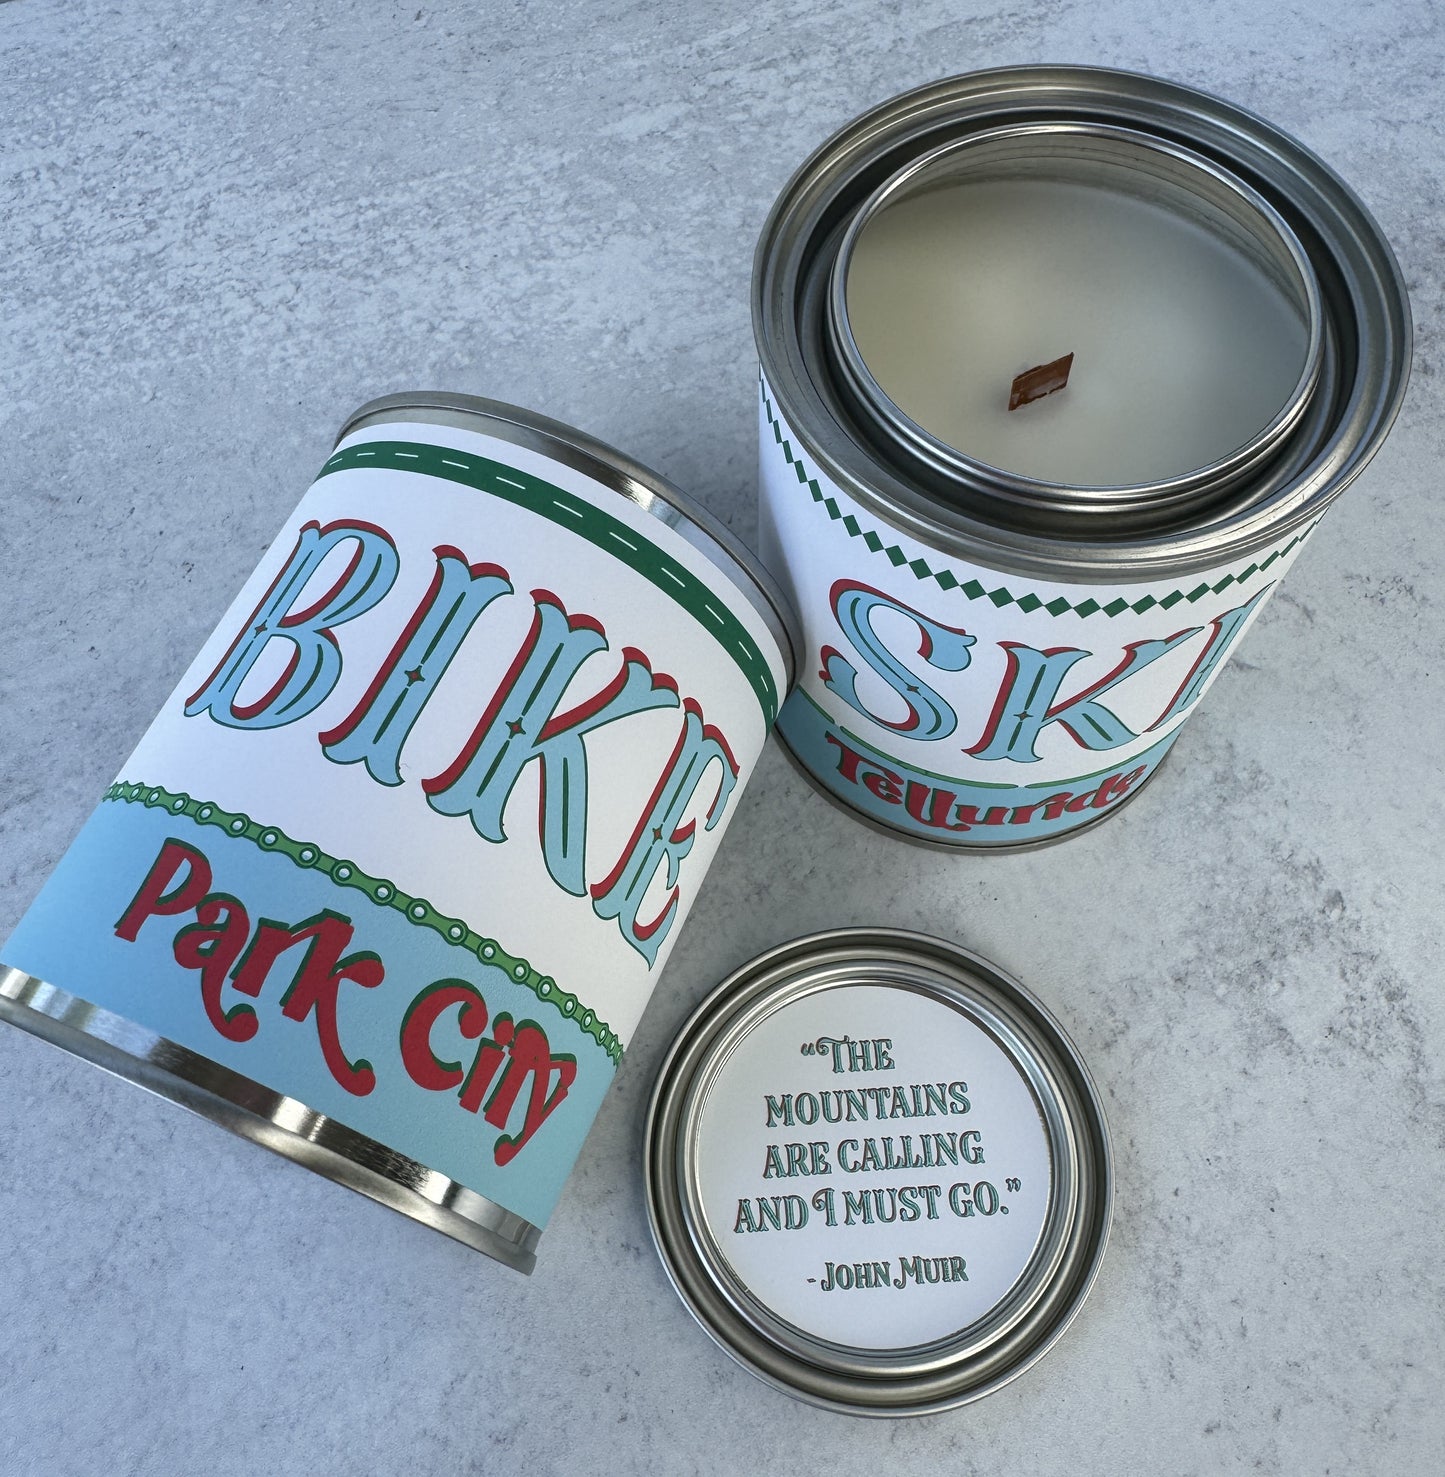 Ski Deer Valley - Paint Tin Candle